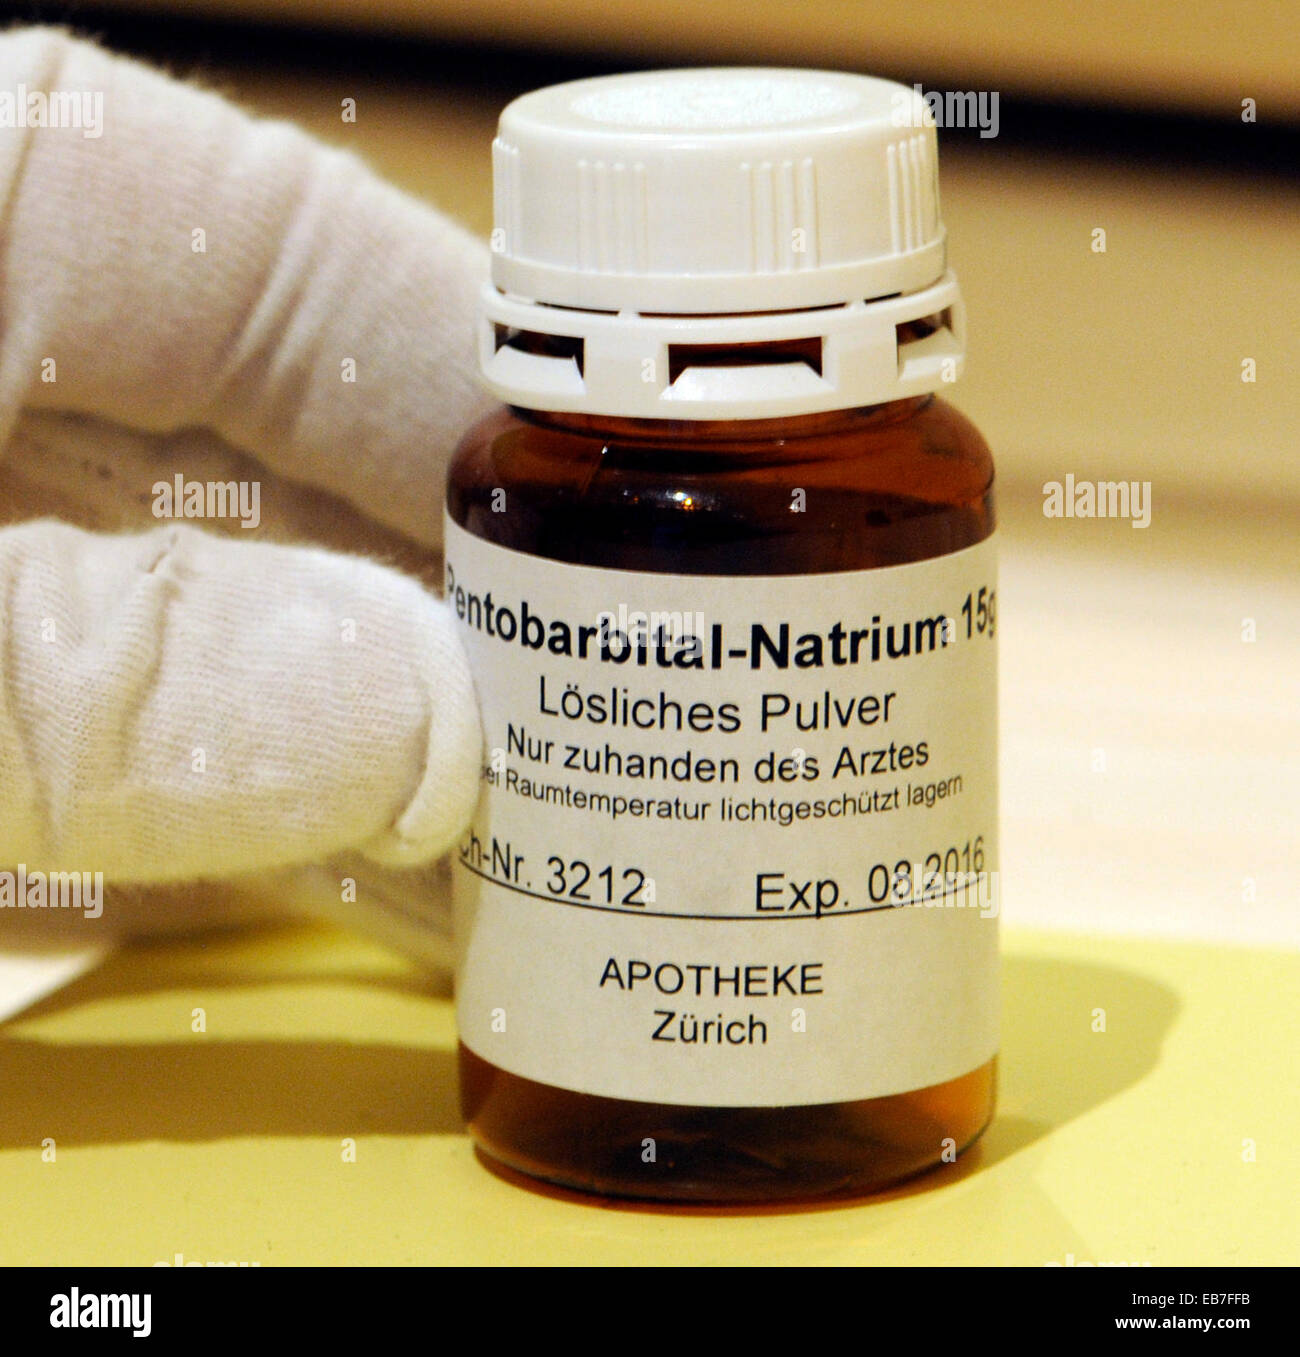 A bottle with Pentobarbital-Natrium, which is used in Switzerland for suicide, seen in Freiburg in the city-museum, April 26, 2012. Stock Photo